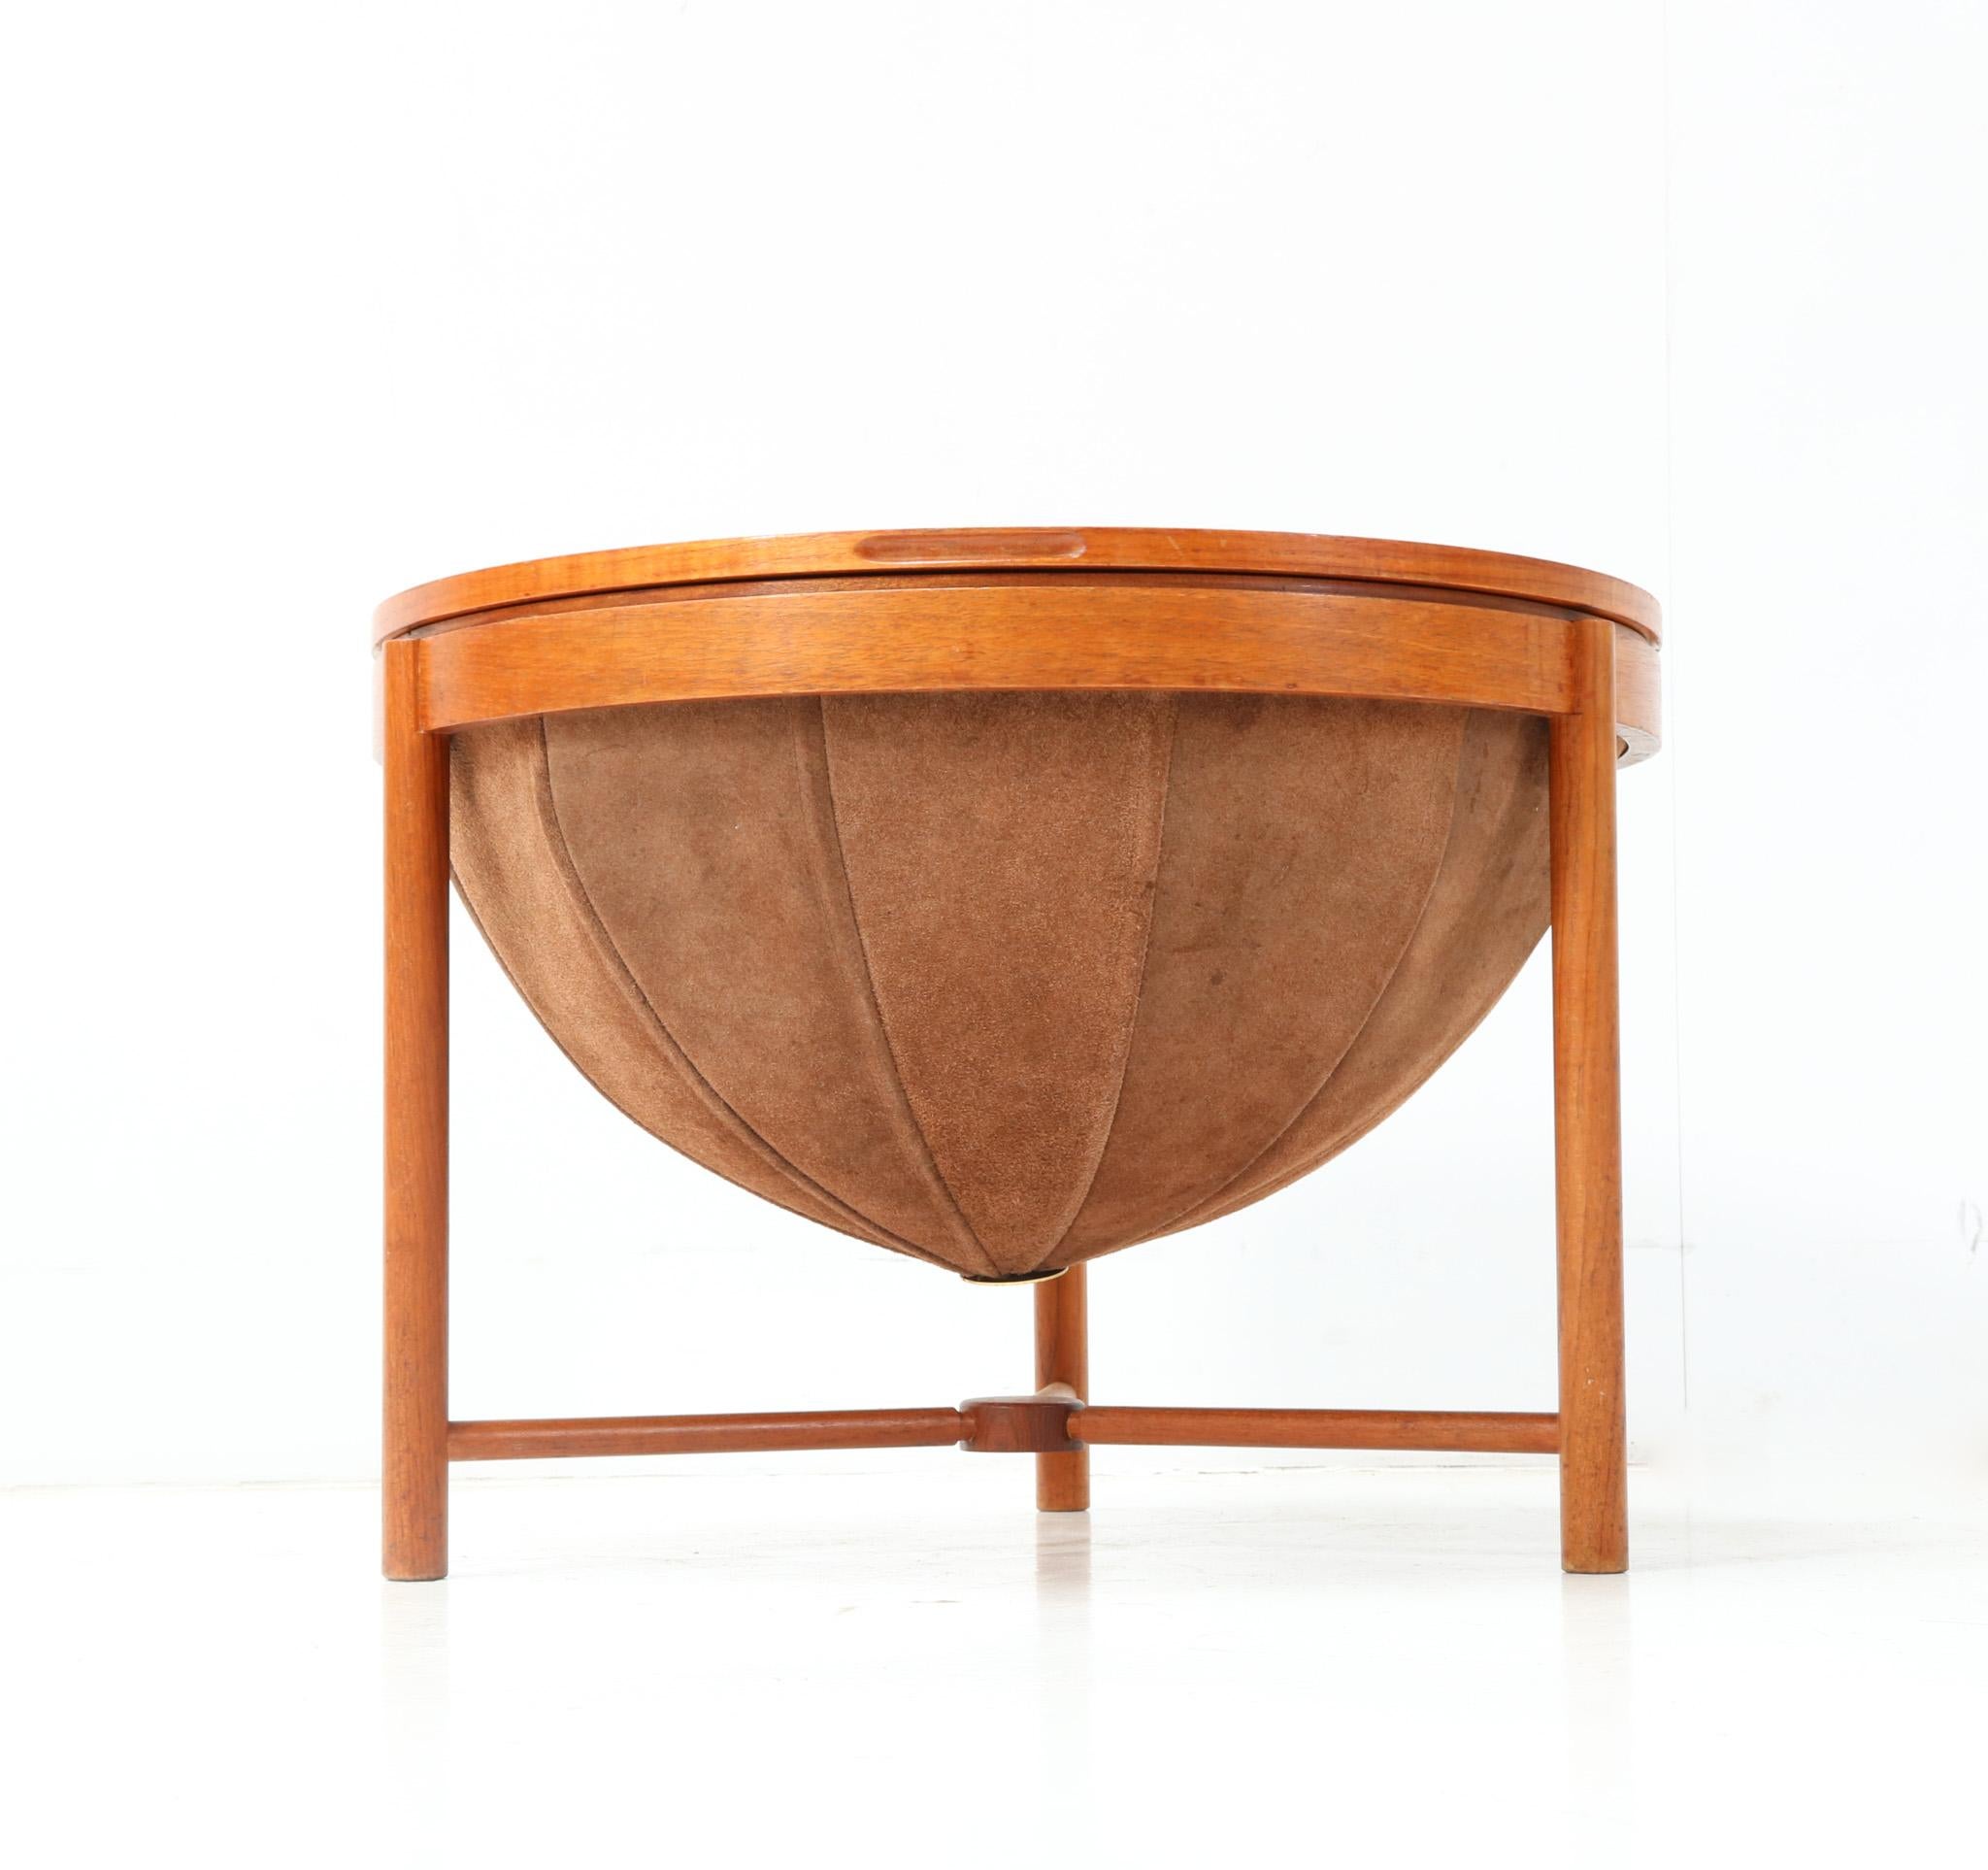 Mid-20th Century  Mid-Century Modern Teak Sewing Table by Rastad & Relling for Rasmus Solberg For Sale